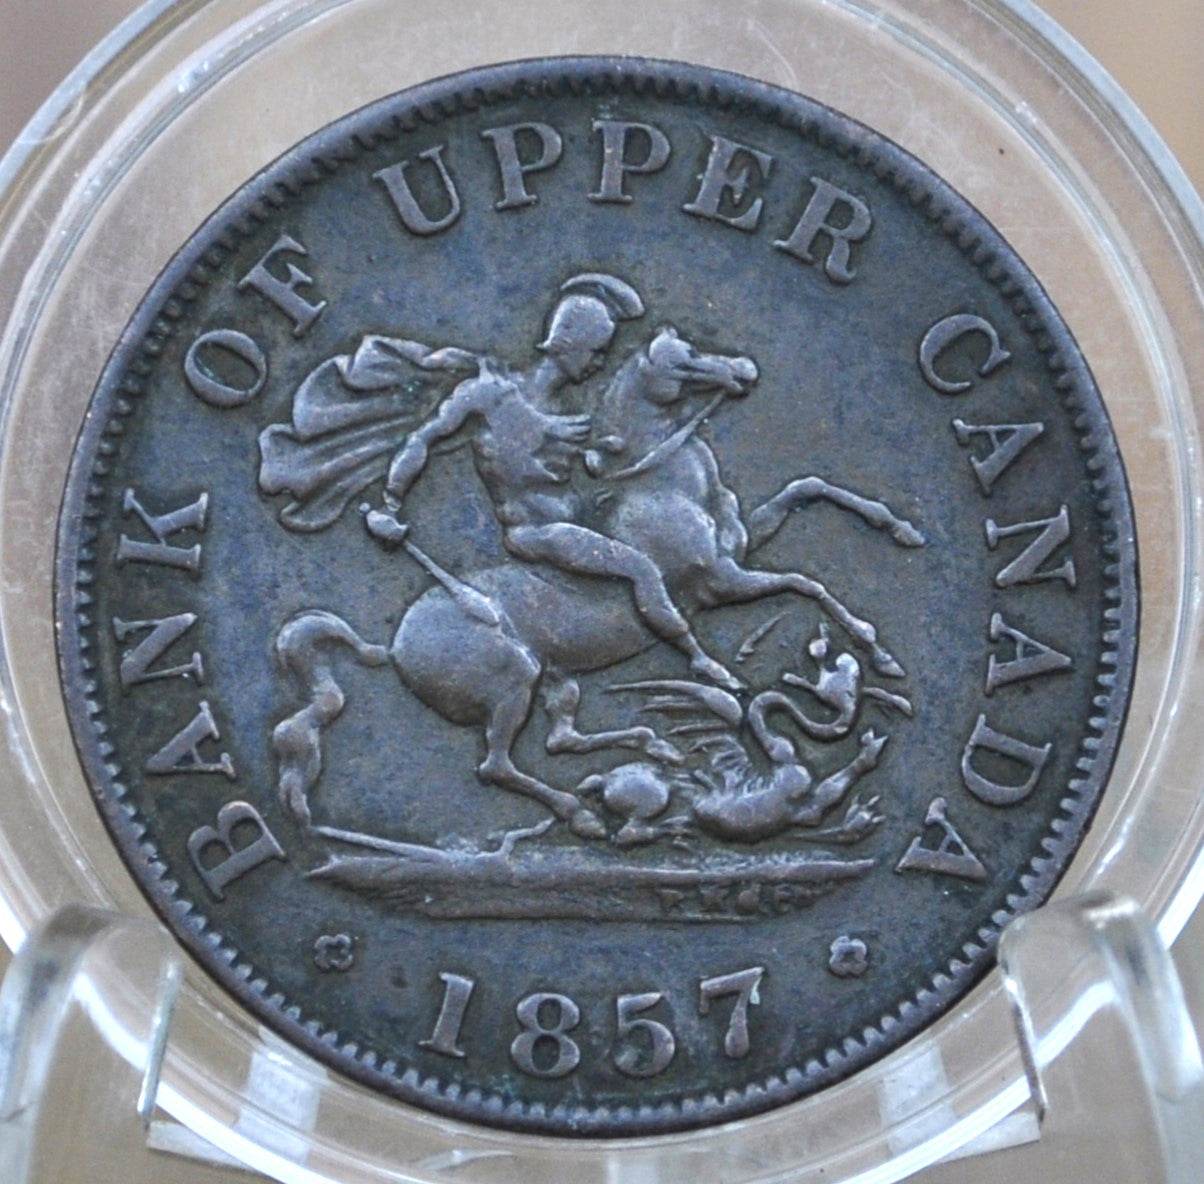 1857 Bank of Upper Canada One Half Penny - 1/2 Penny Bank Token - Great Detail / Condition - 1857 Bank Token One Penny - 1857 Canadian Bank Token